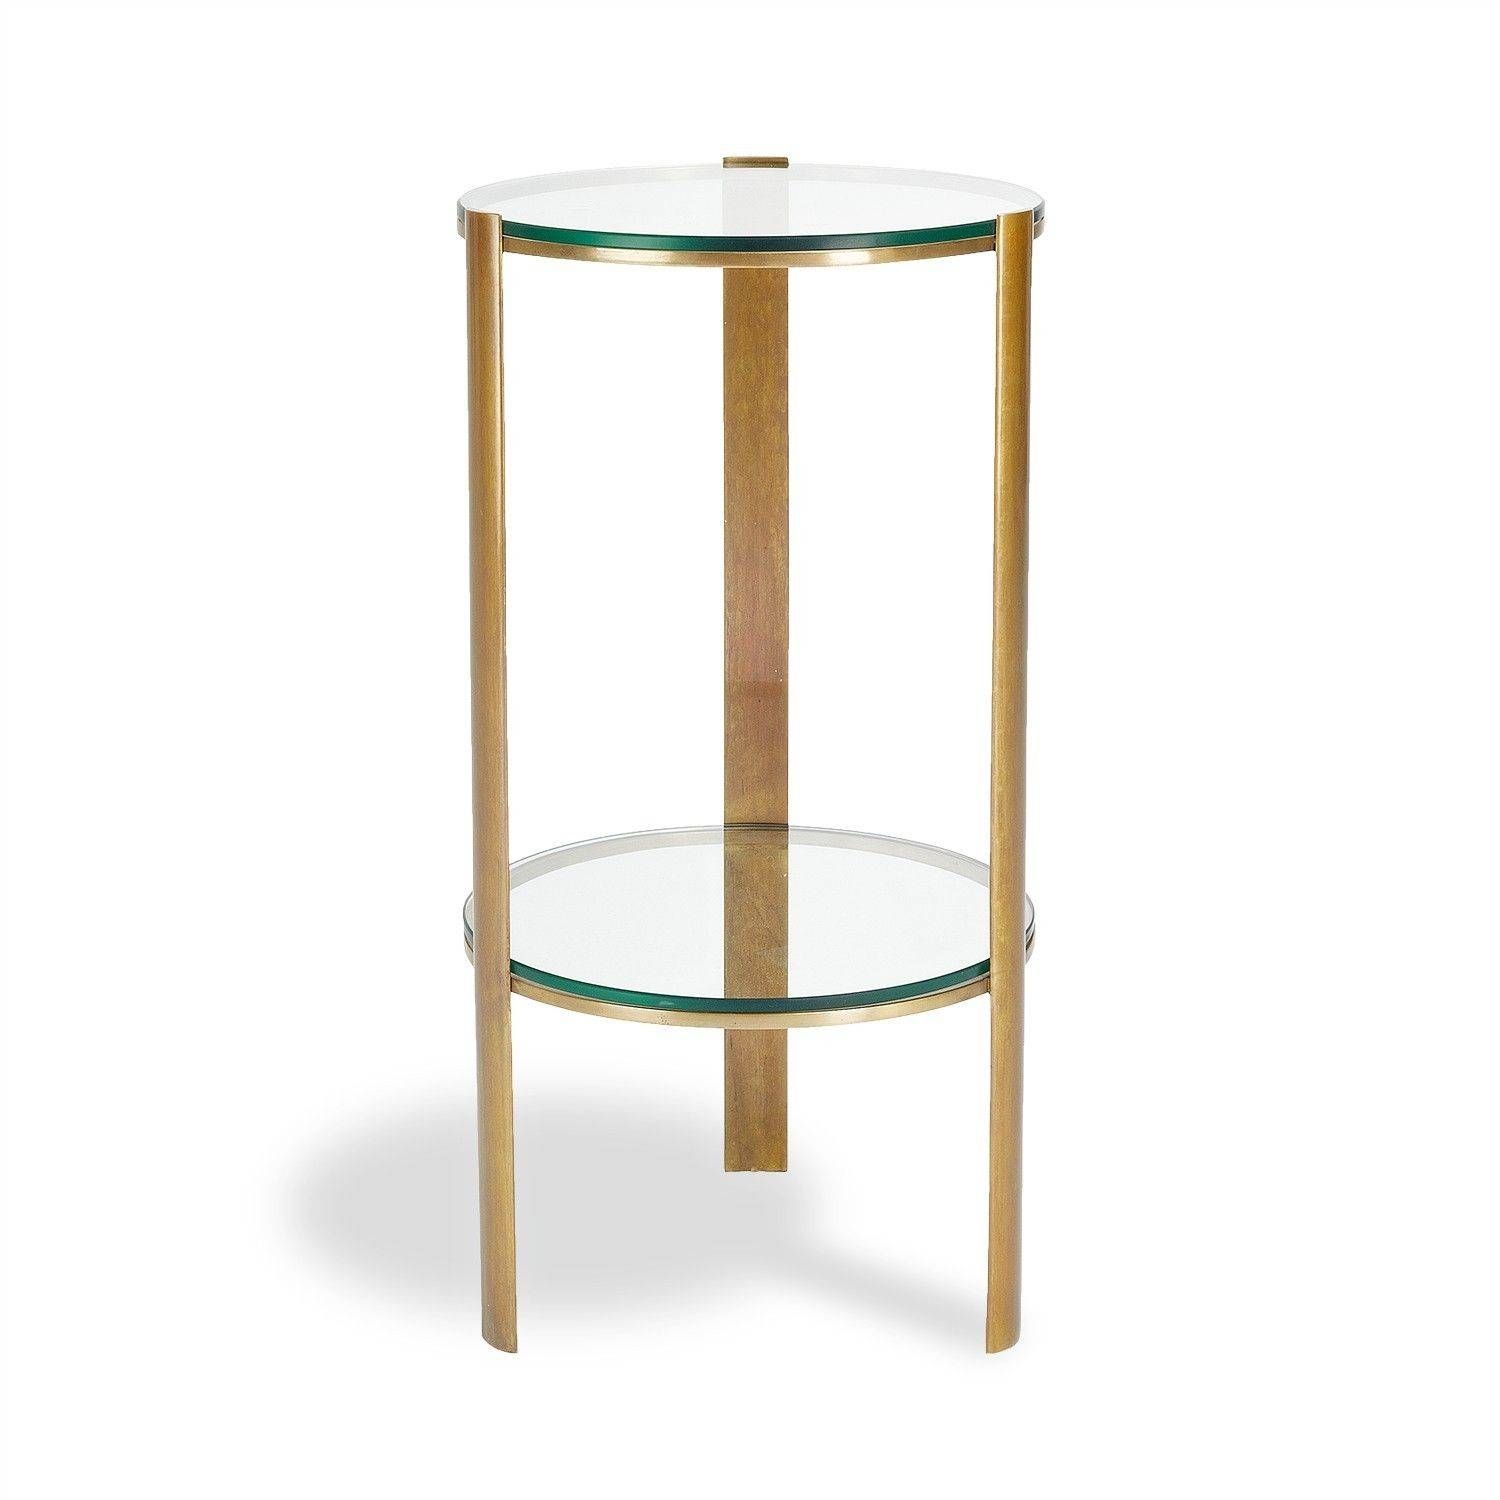 Classic Brass Round Side Table Intended For Glass Circle Coffee Tables (View 28 of 30)